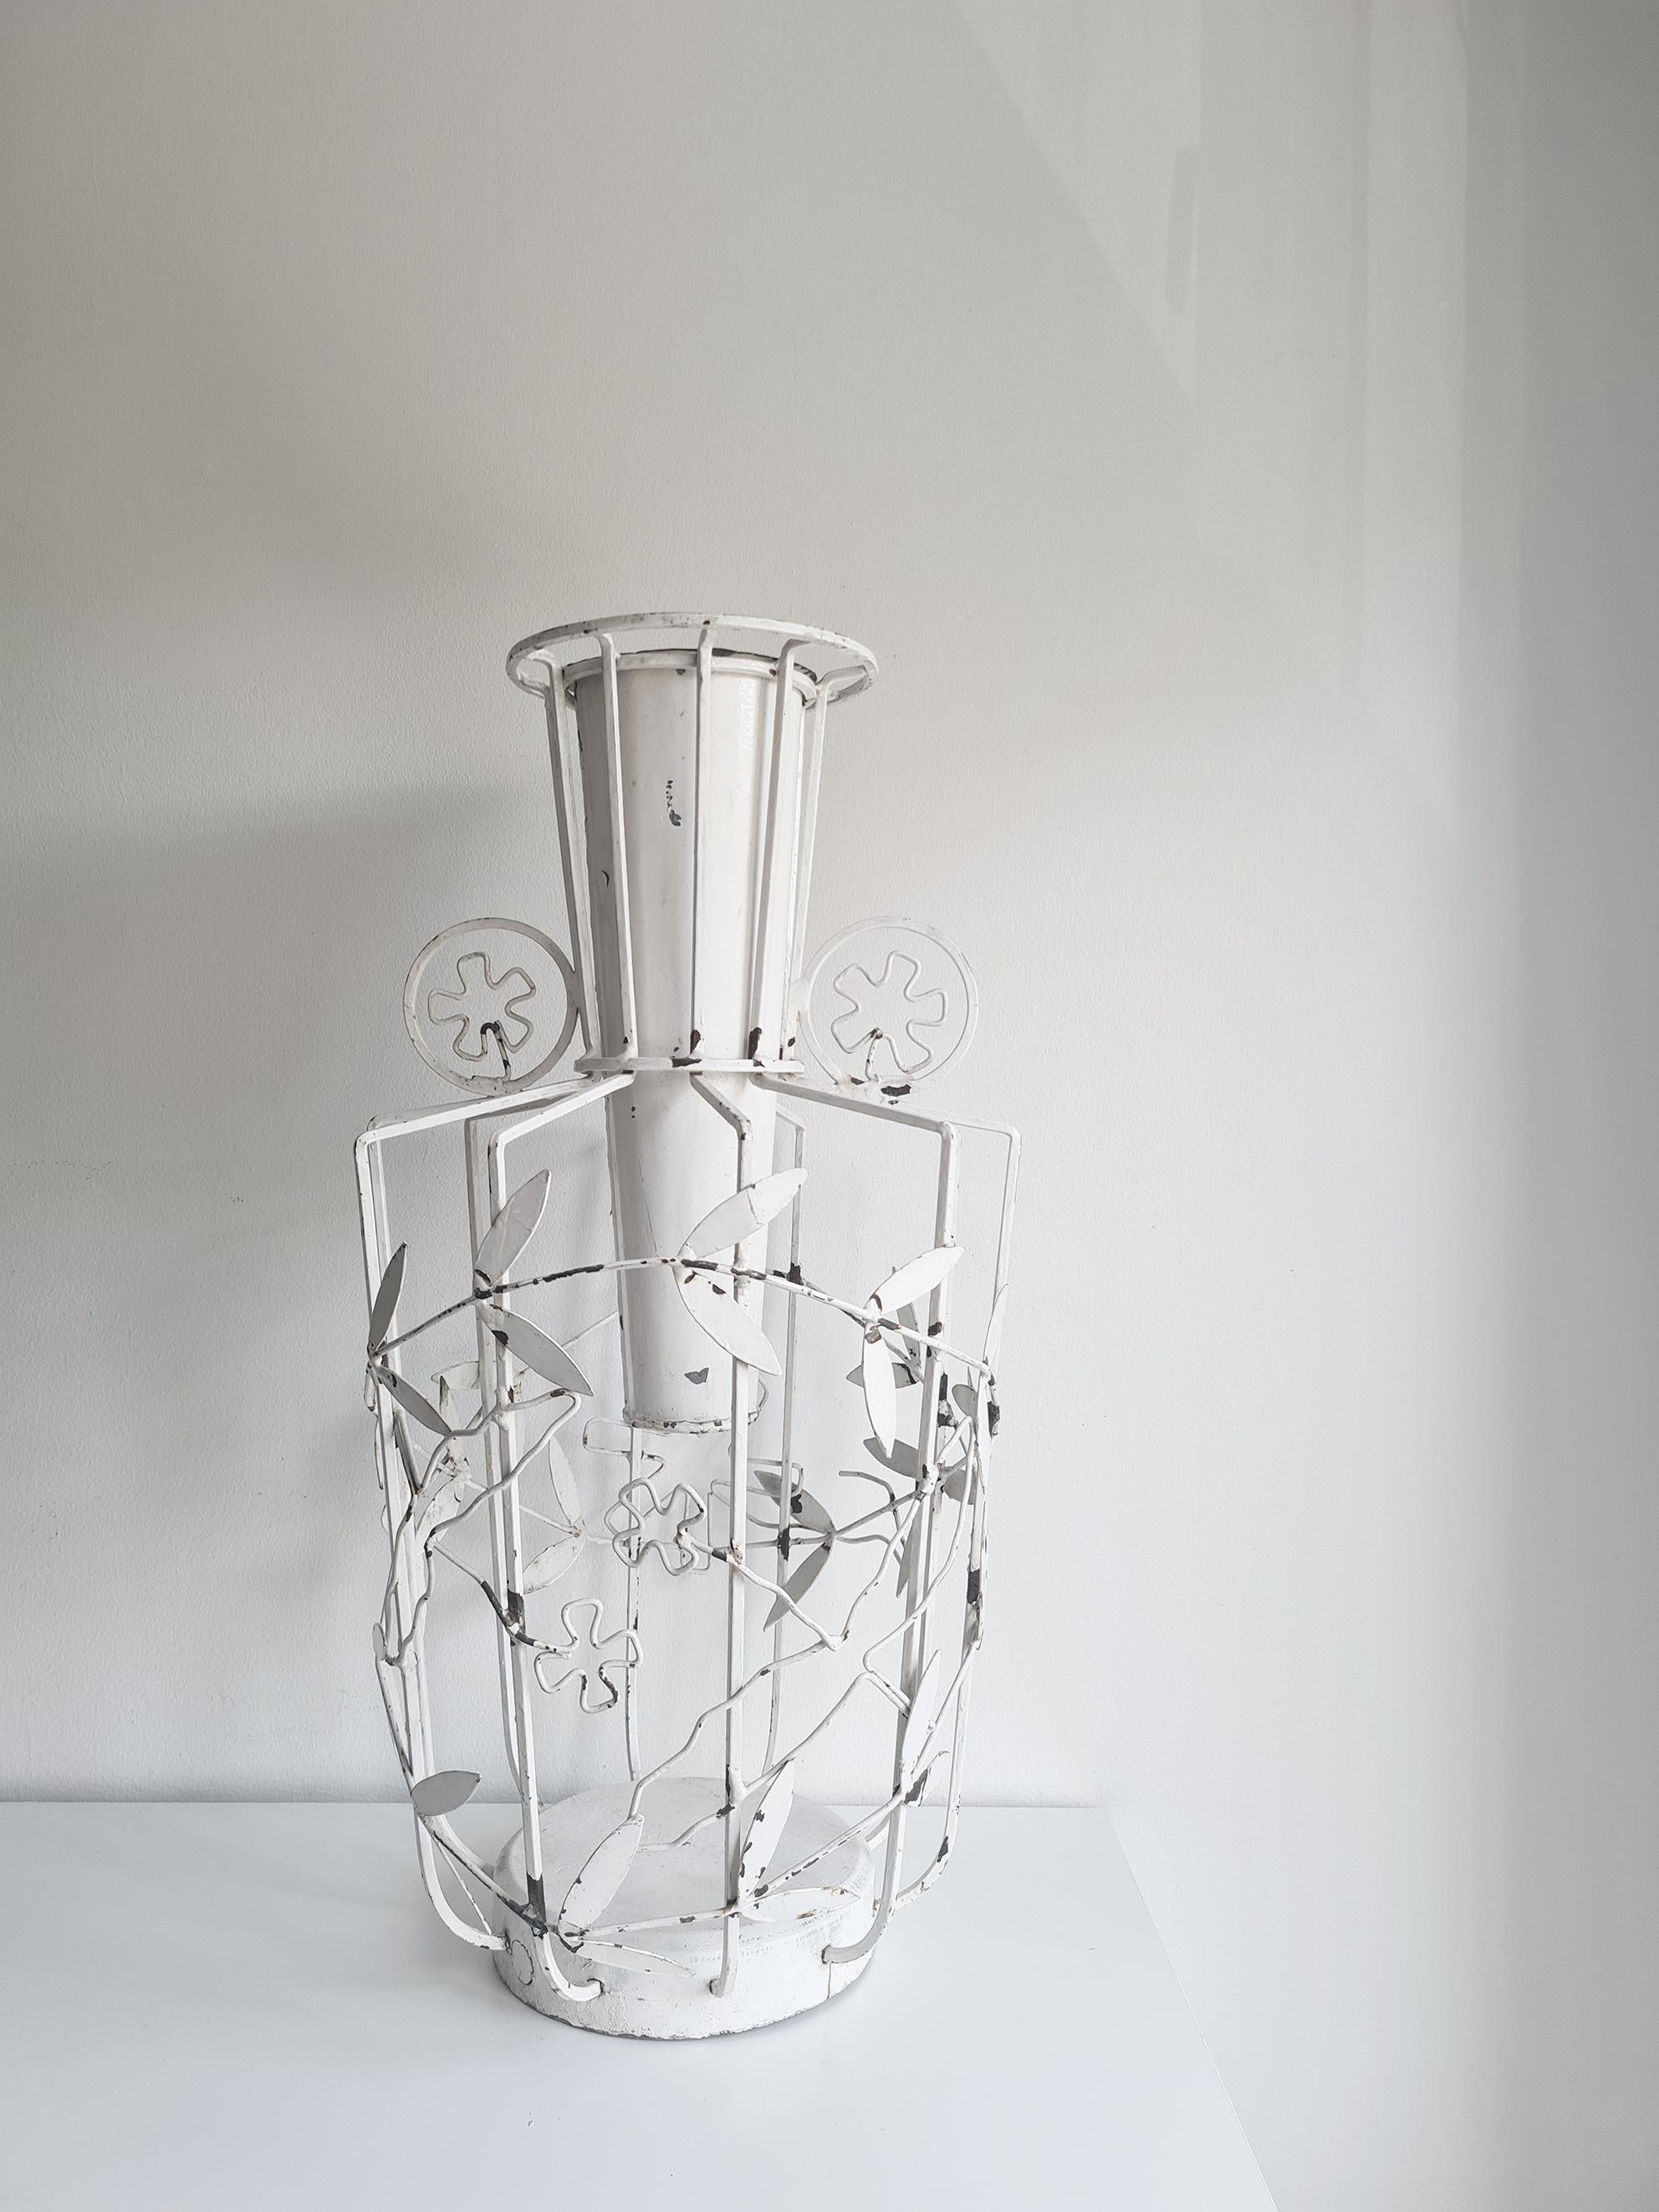 Very rare and possibly unique scandinavian modern floor vase, circa 1930-1940s. 
Decorative piece with leaves, flowers and birds. In the style of Hans Bergström and Otto Schultz.
Unknown designer and maker. 

Condition: wear consistent with age